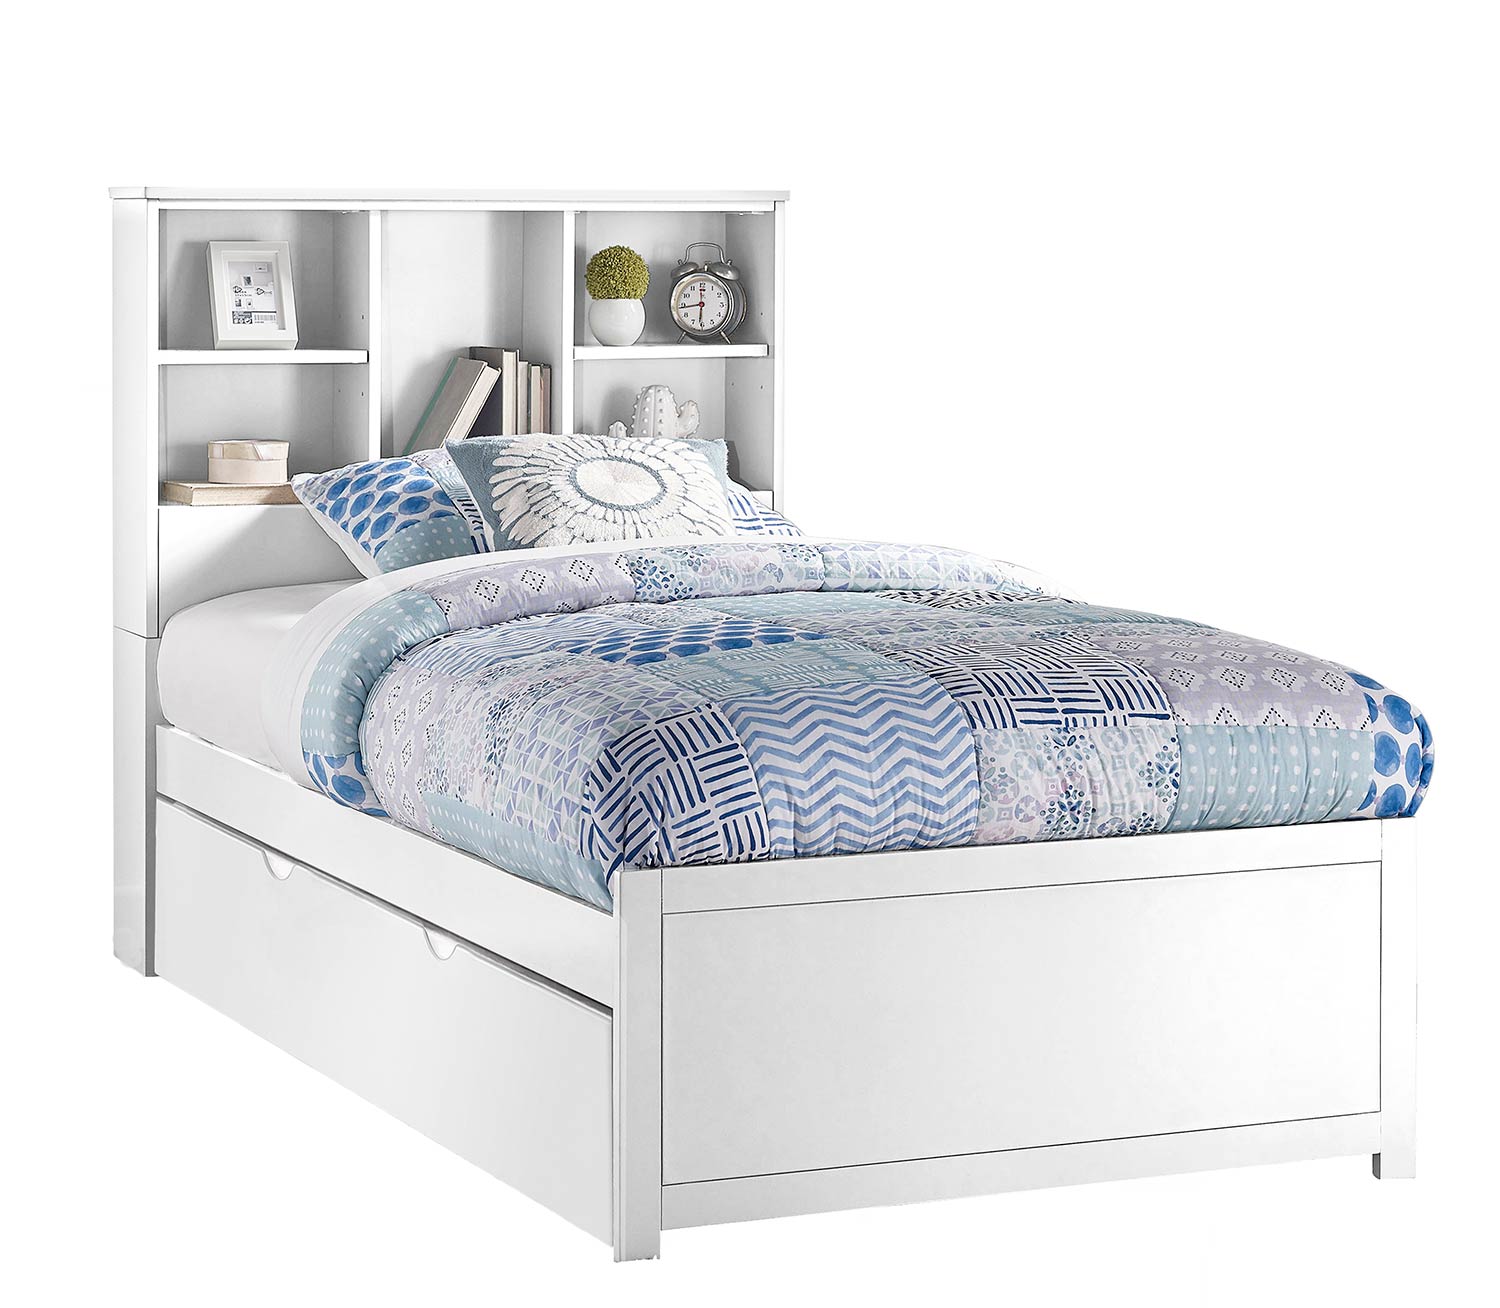 Hillsdale Caspian Twin Bookcase Bed with Trundle Unit - White